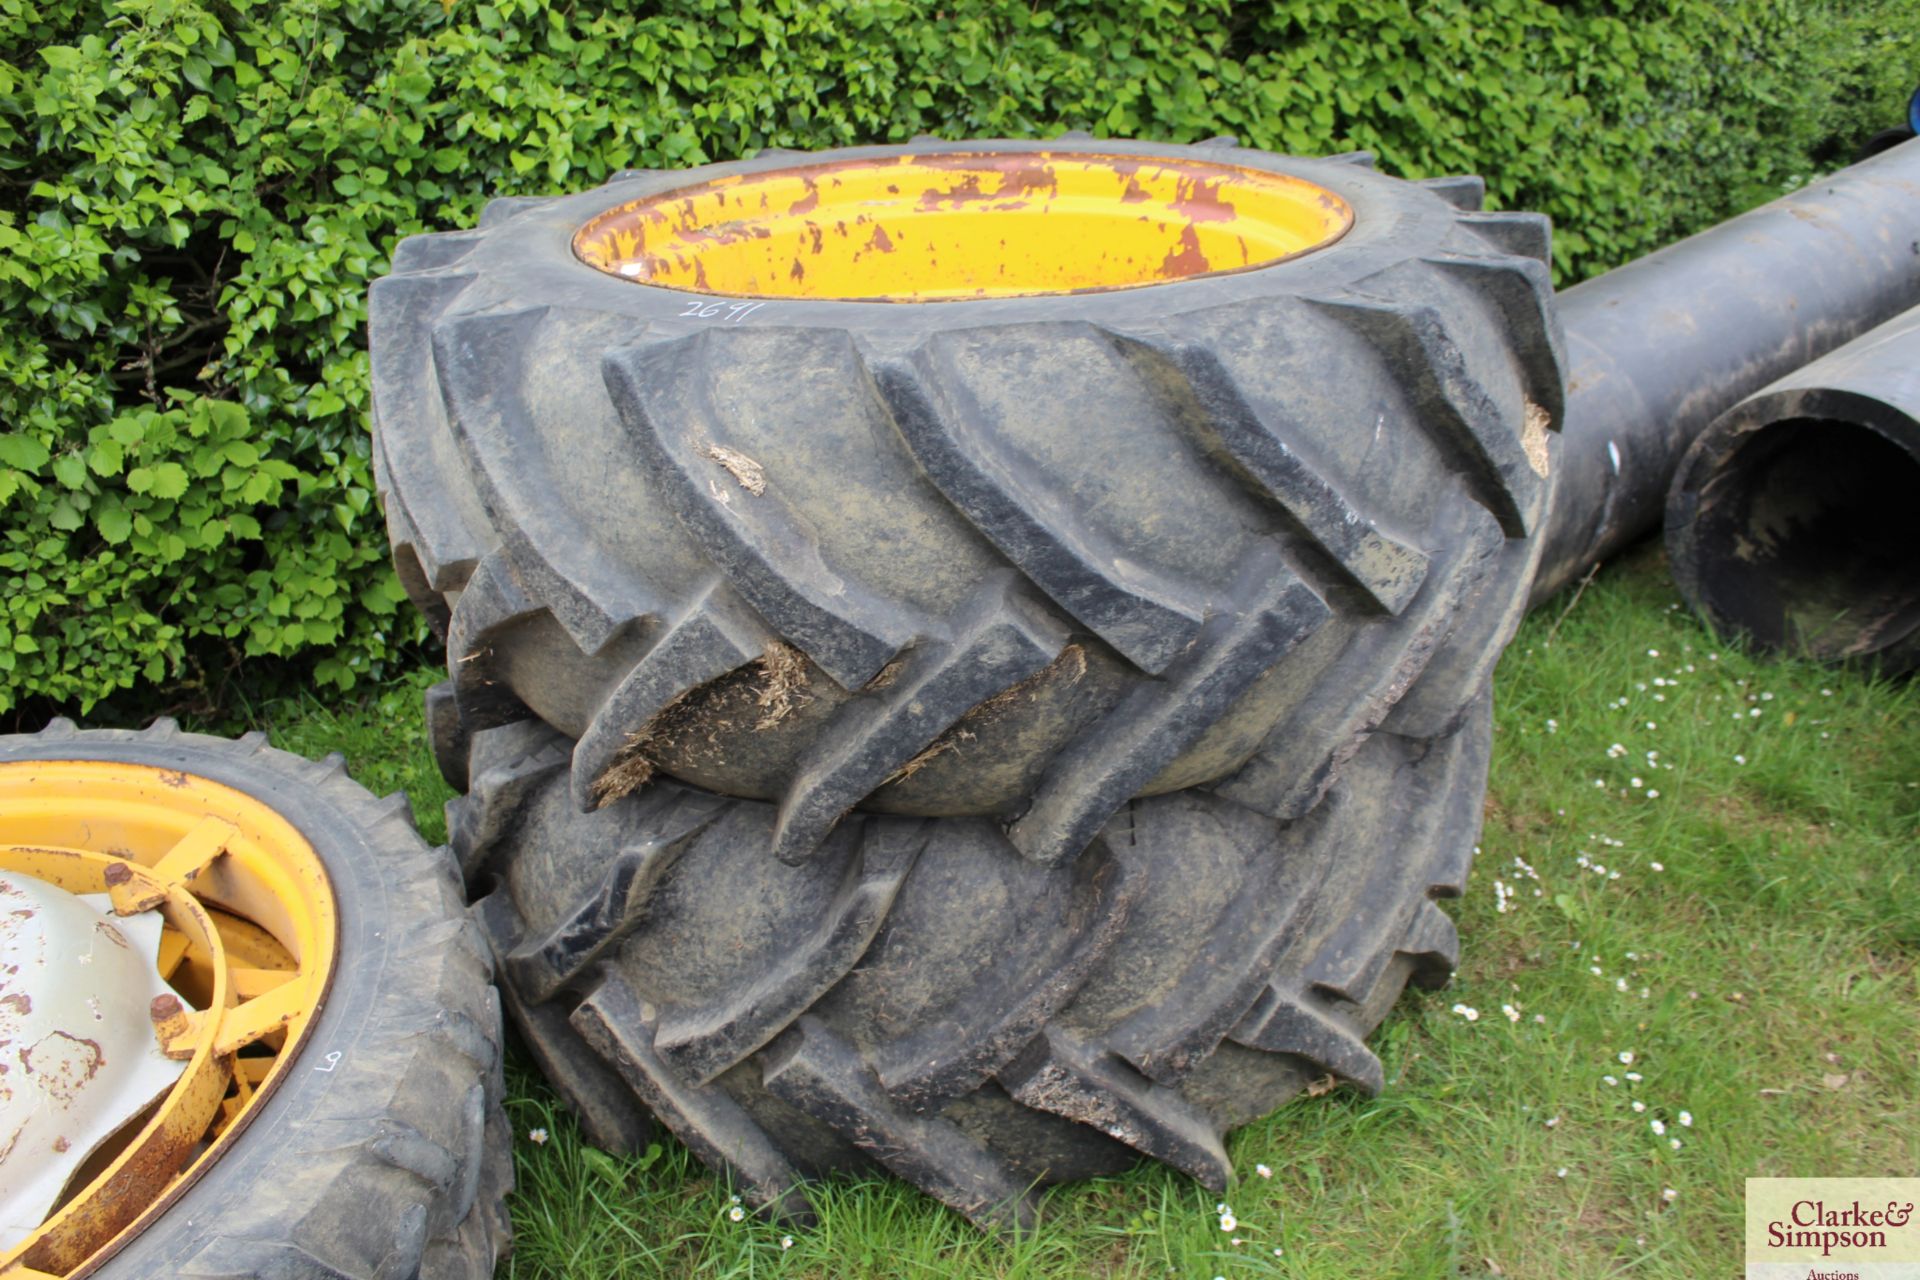 2x 600/55-38 Trelleberg wheels and tyres to fit John Deere 50 Series. V